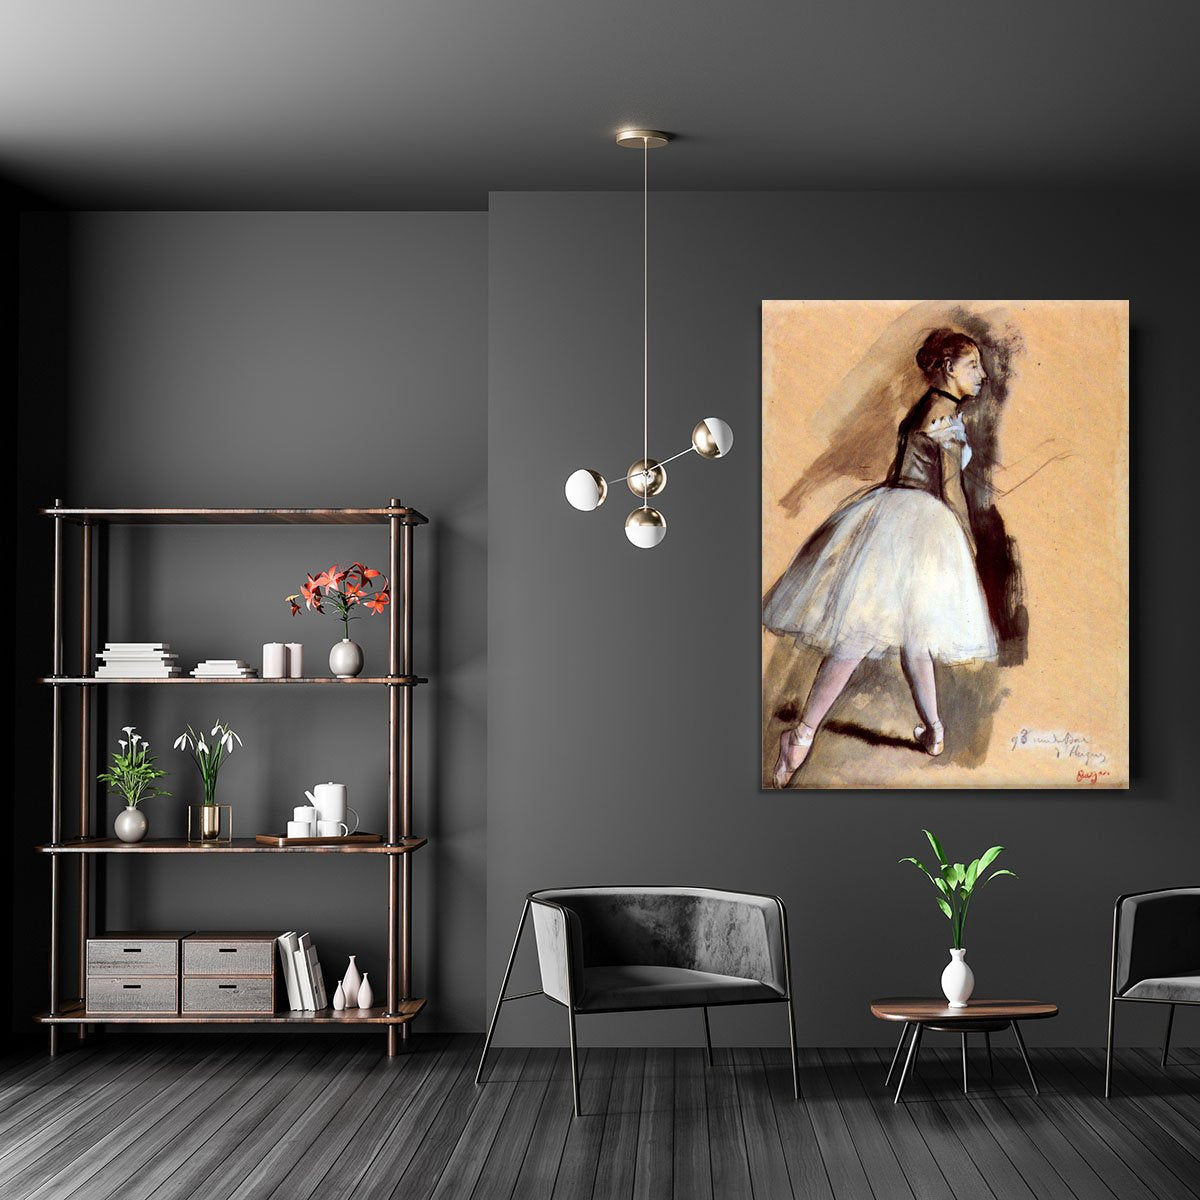 Dancer in step position 1 by Degas Canvas Print or Poster